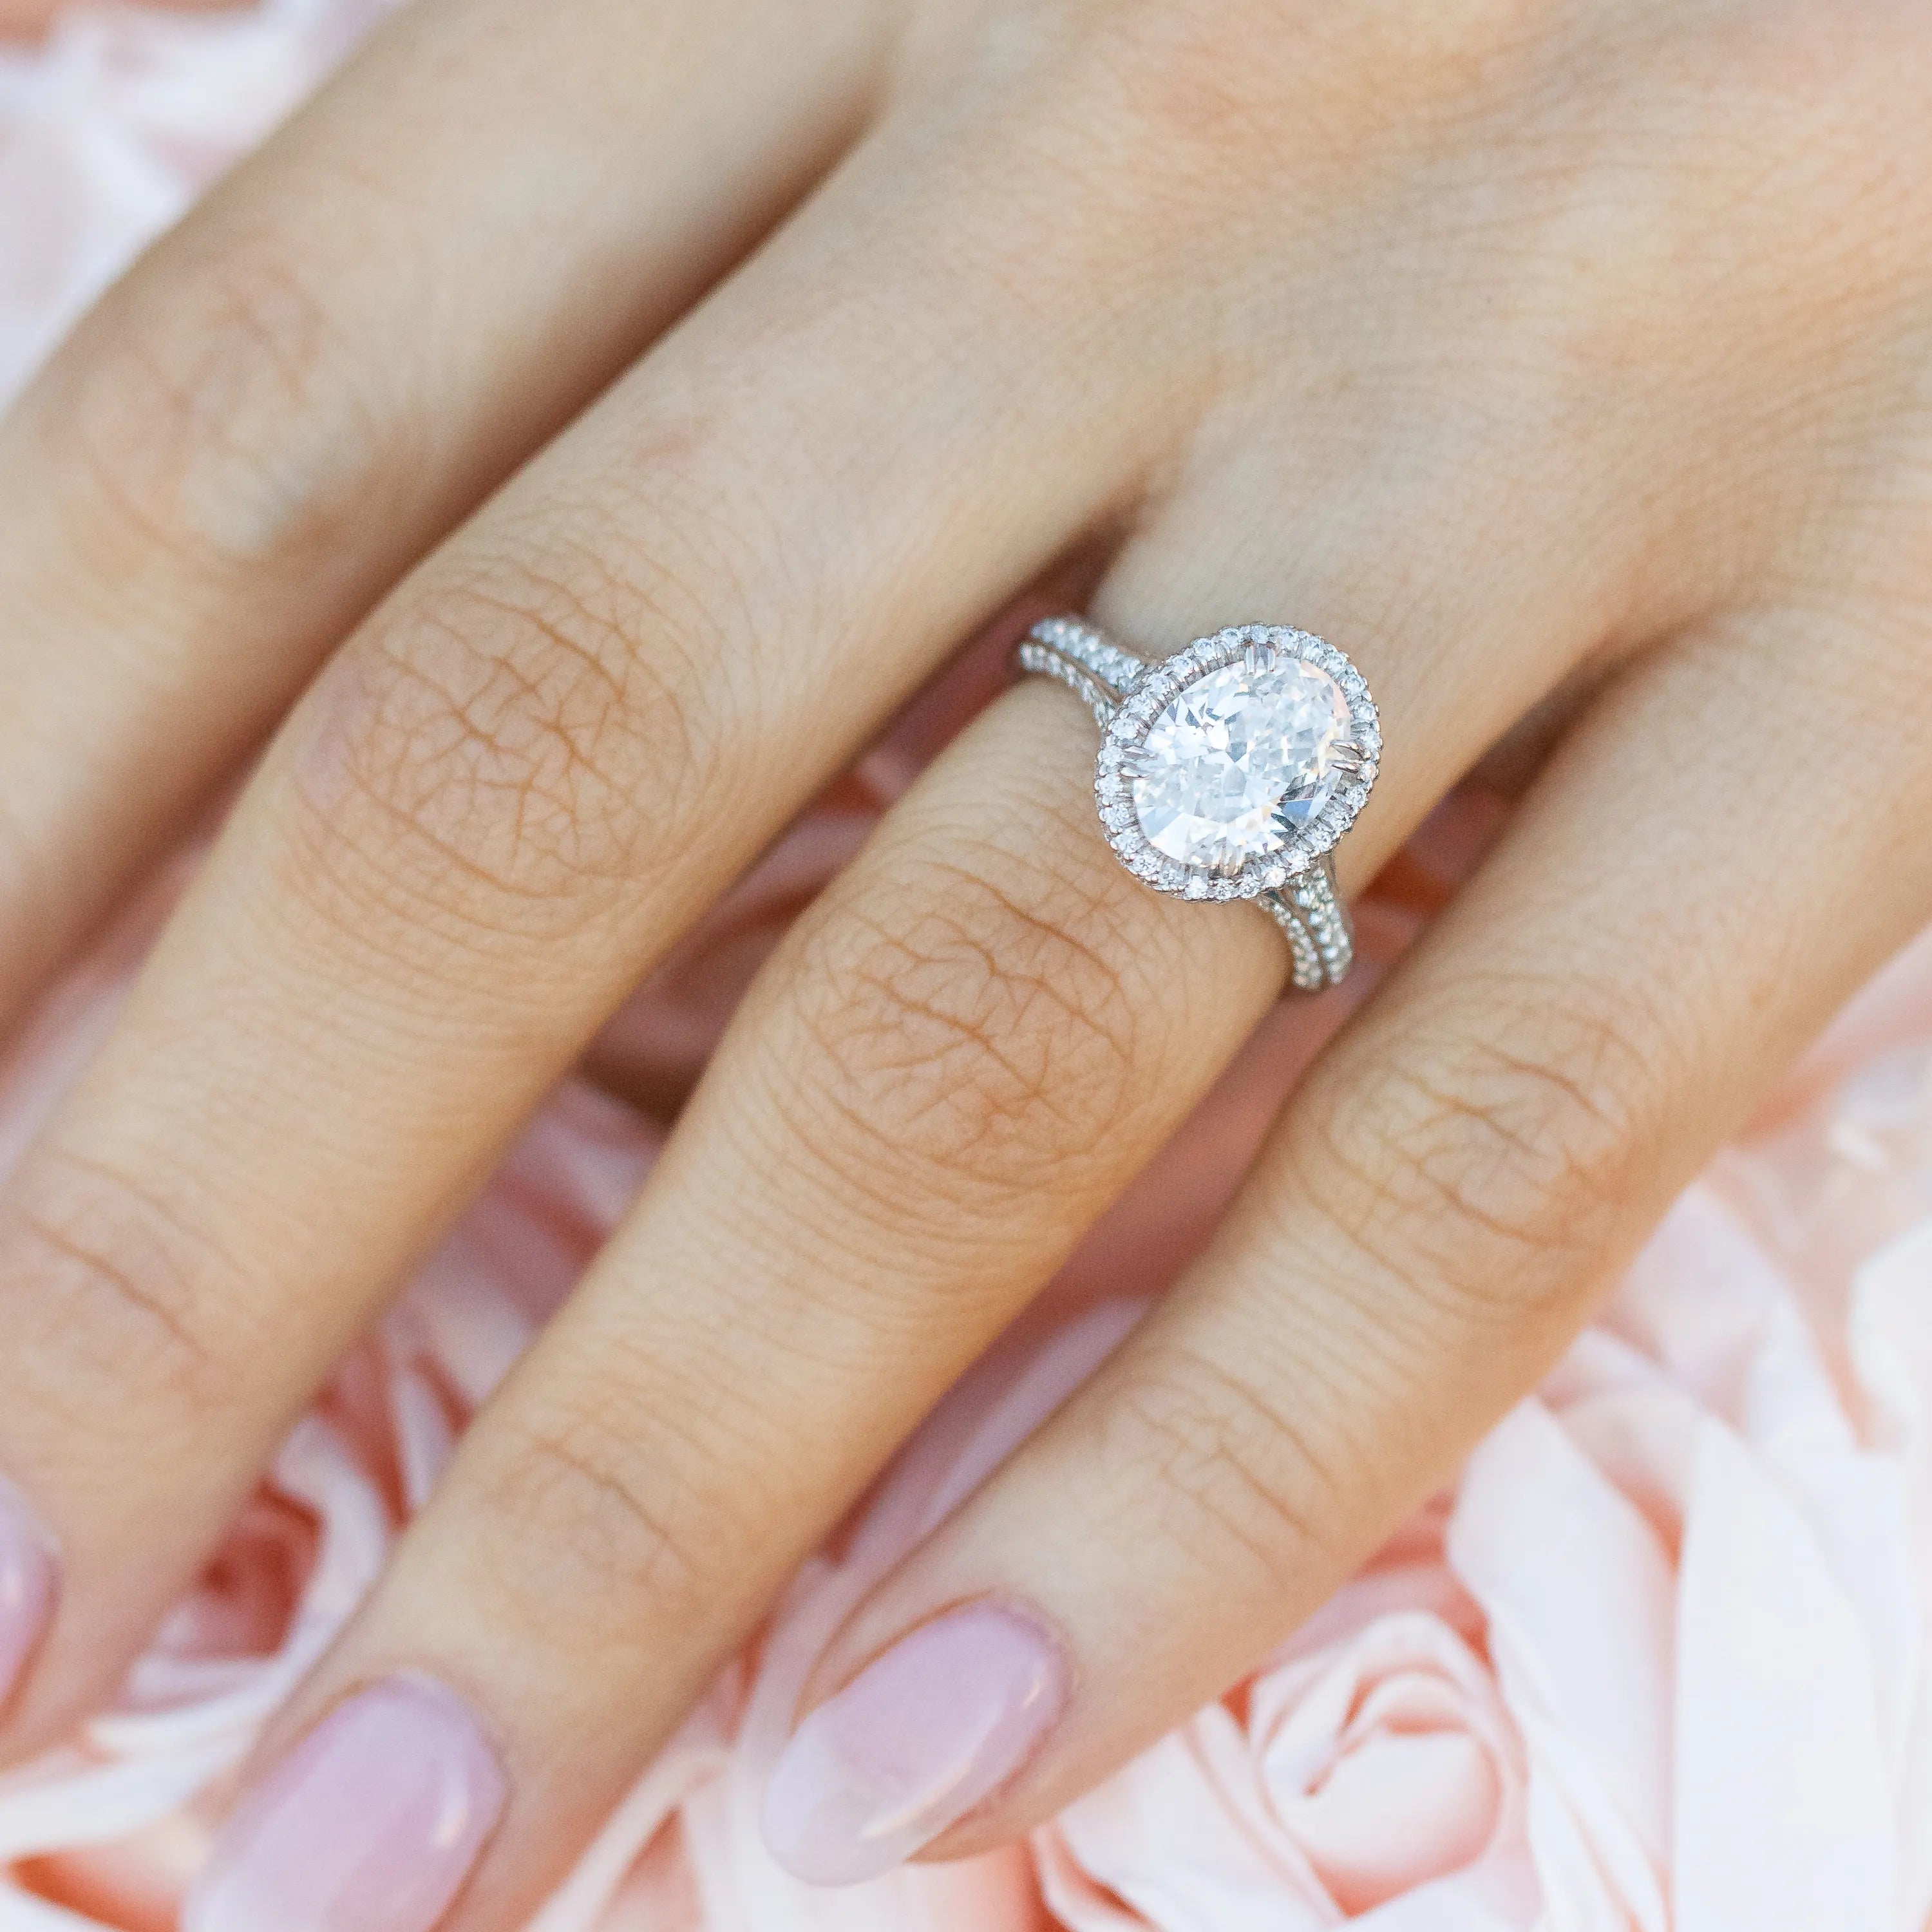 What does wearing a ring on each finger symbolize?